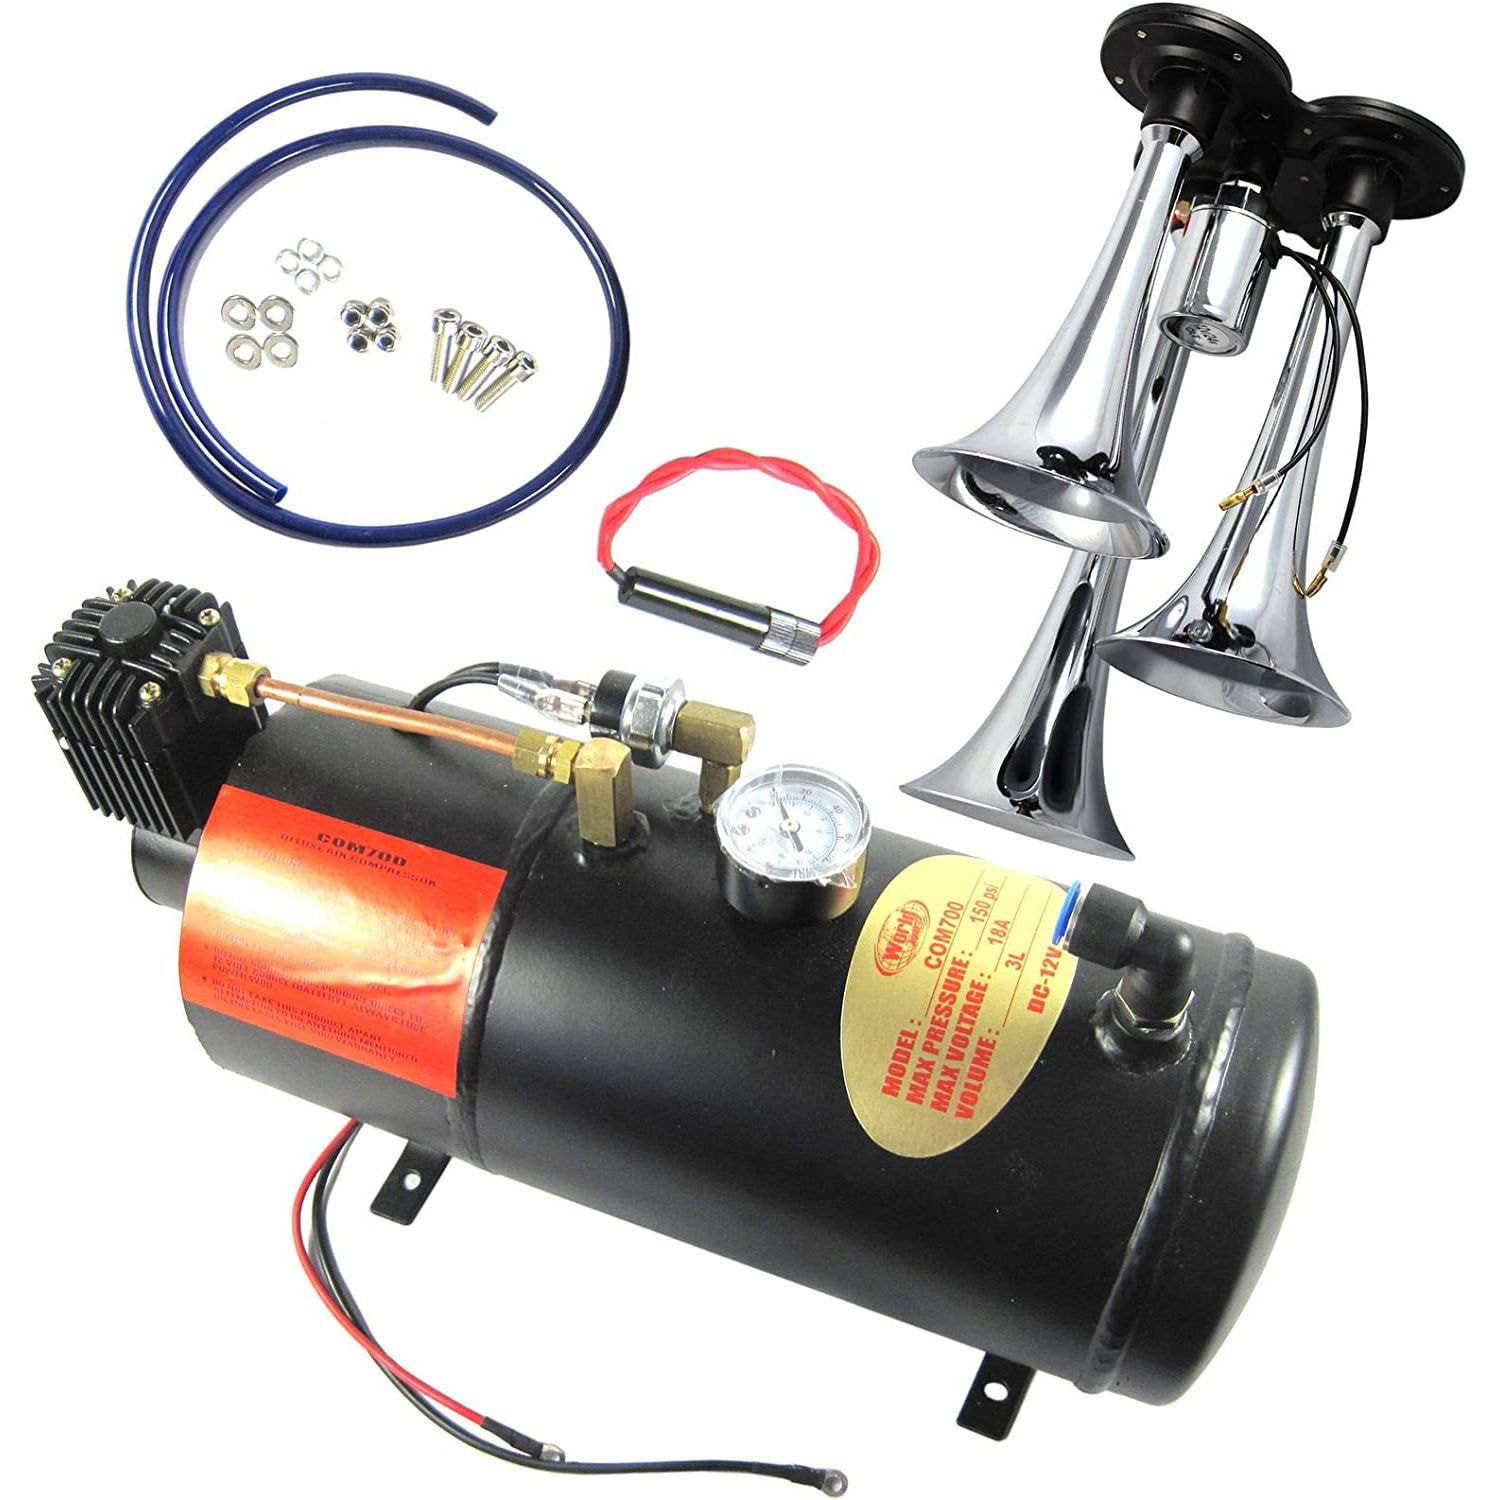 Shop Powered 3 Trumpet Air Horn With 150 Psi 3 Liter 12V Air Compressor